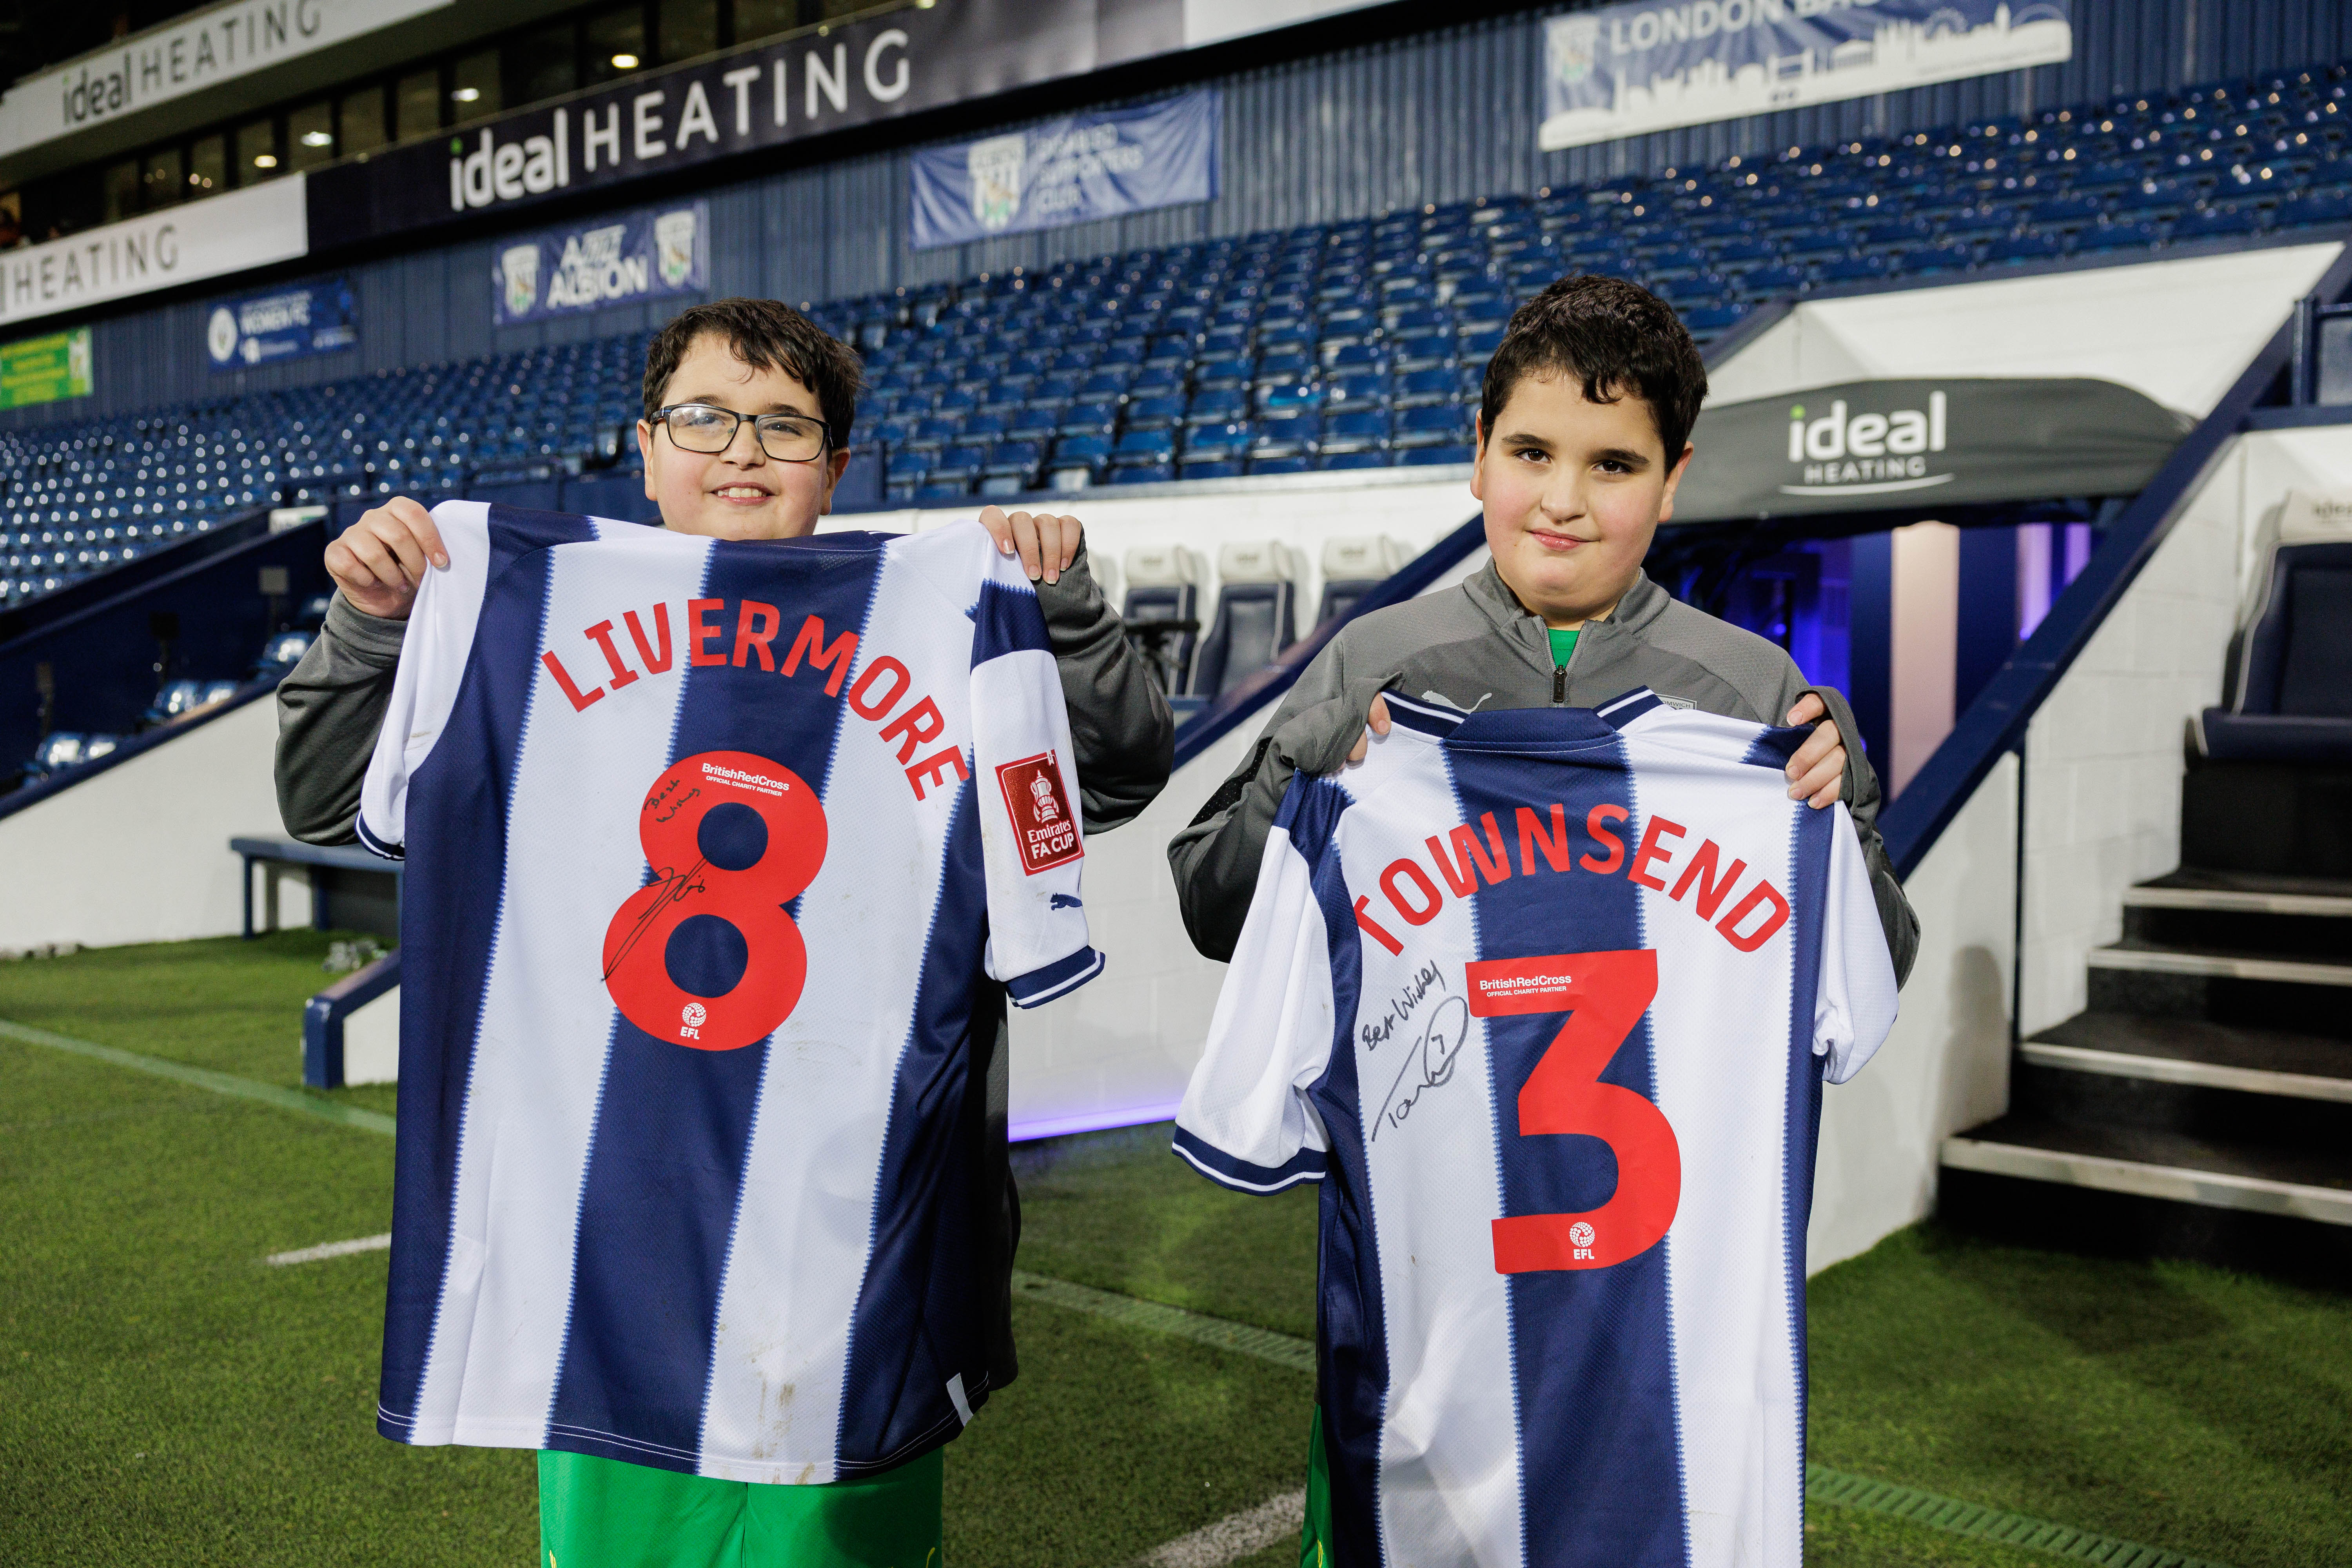 James & Richard holding shirts signed by Livermore & Townsend 